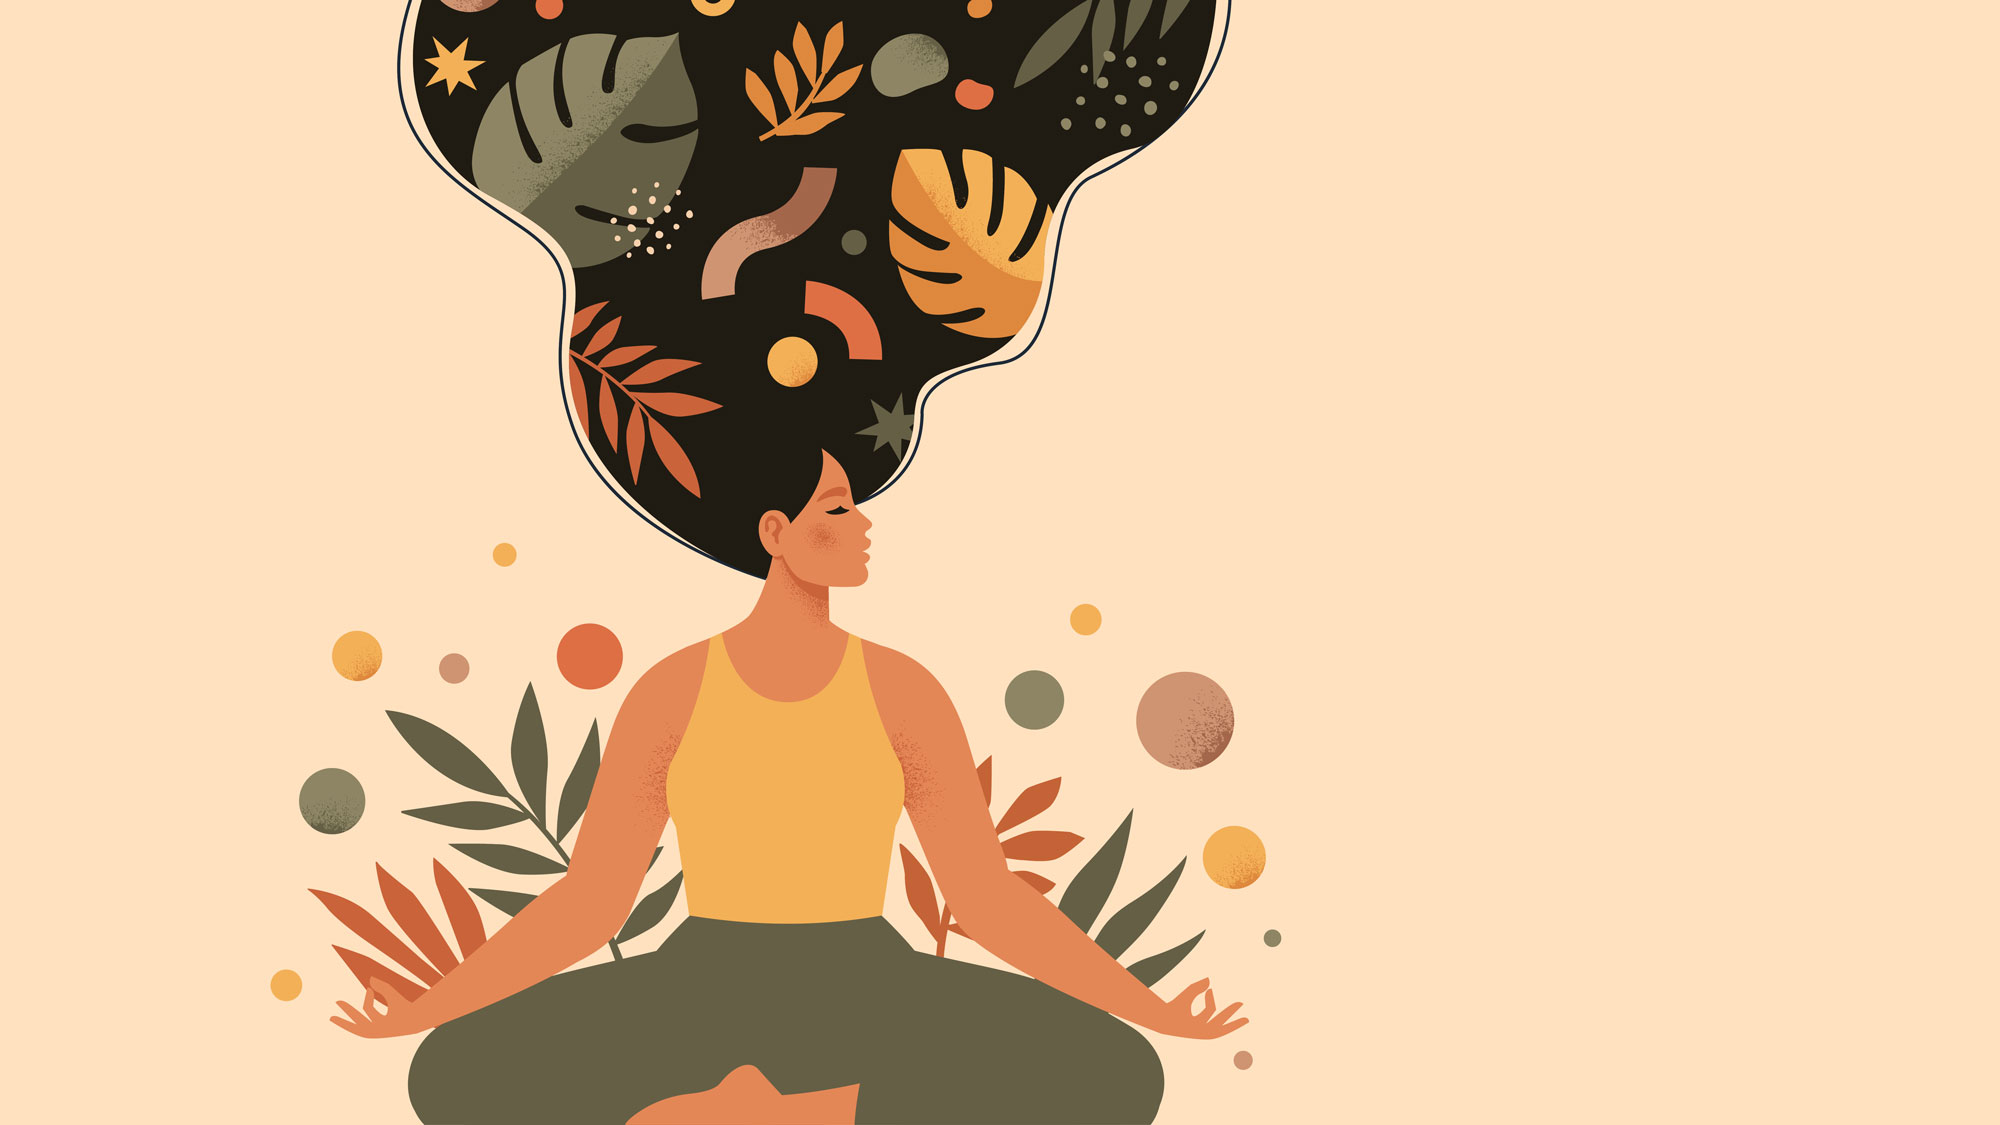 Illustration woman in lotus position with dark hair flowing upwards and overlain with floral designs